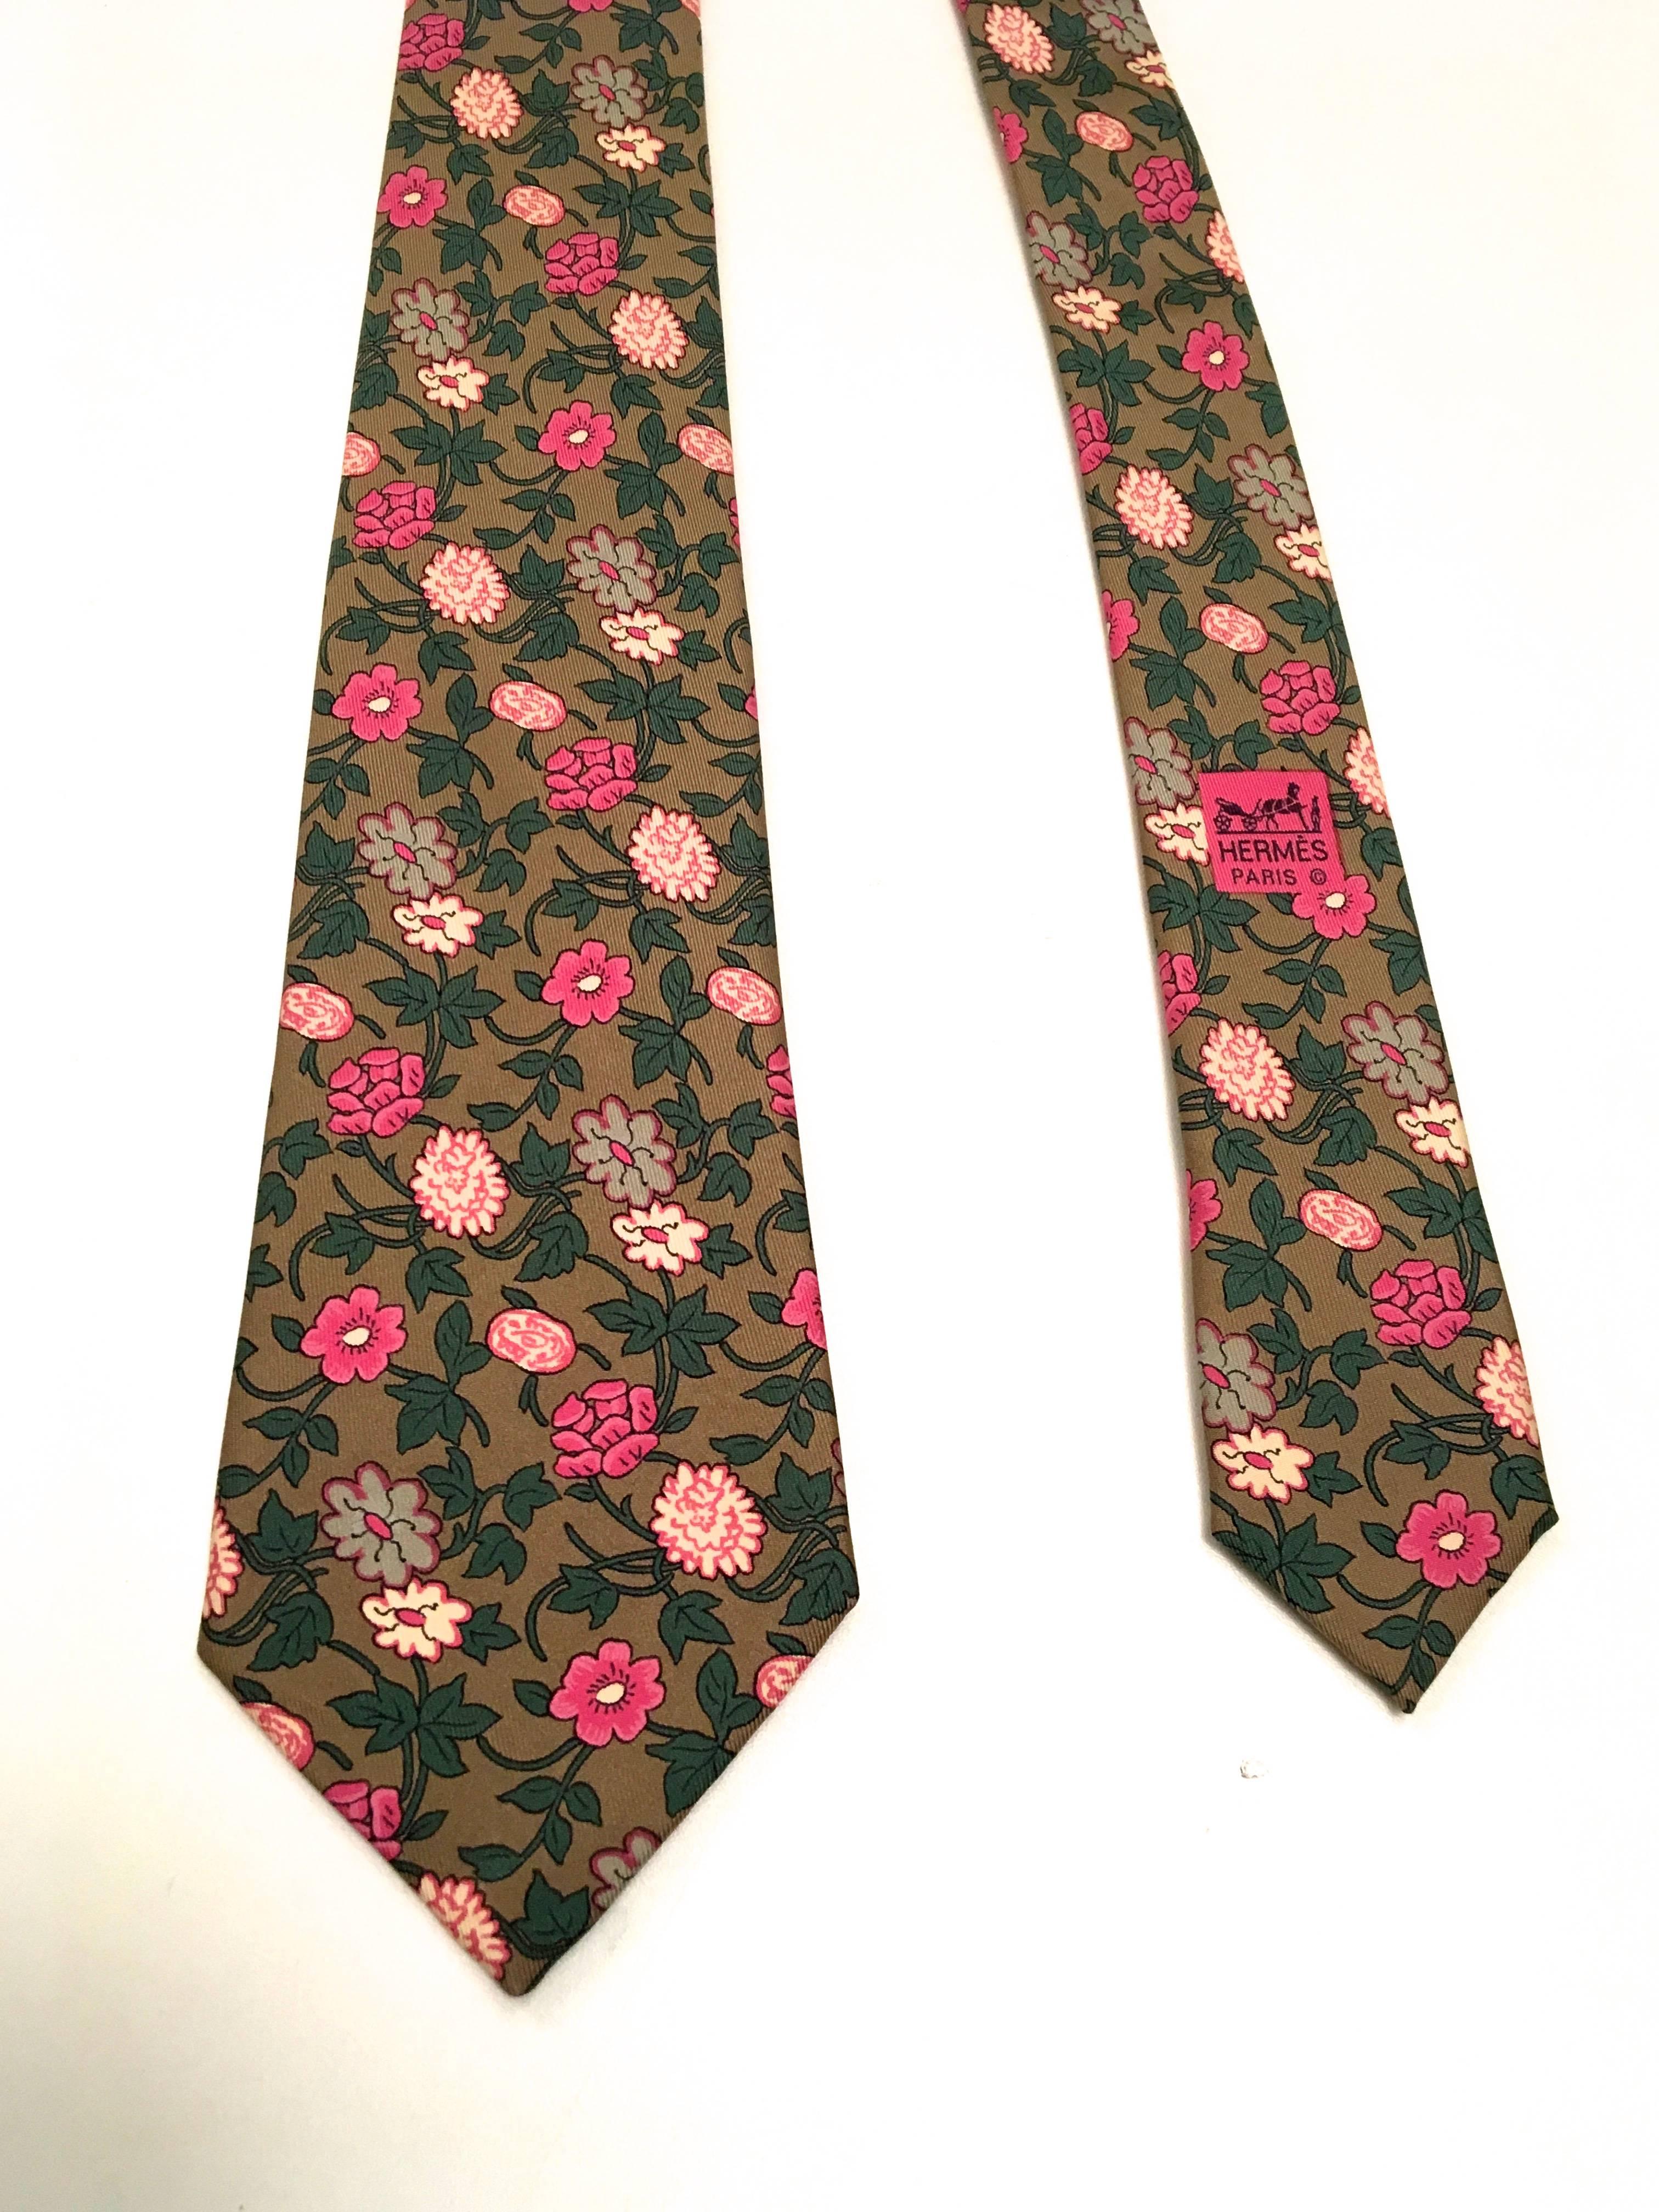 Presented here is a beautiful necktie from Hermes Paris. This vintage neck tie is a floral print in colors of pink, magenta, green and brown. At its wide point, the tie measures 3.5 inches.  It is in excellent condition. The tie is made in France. 